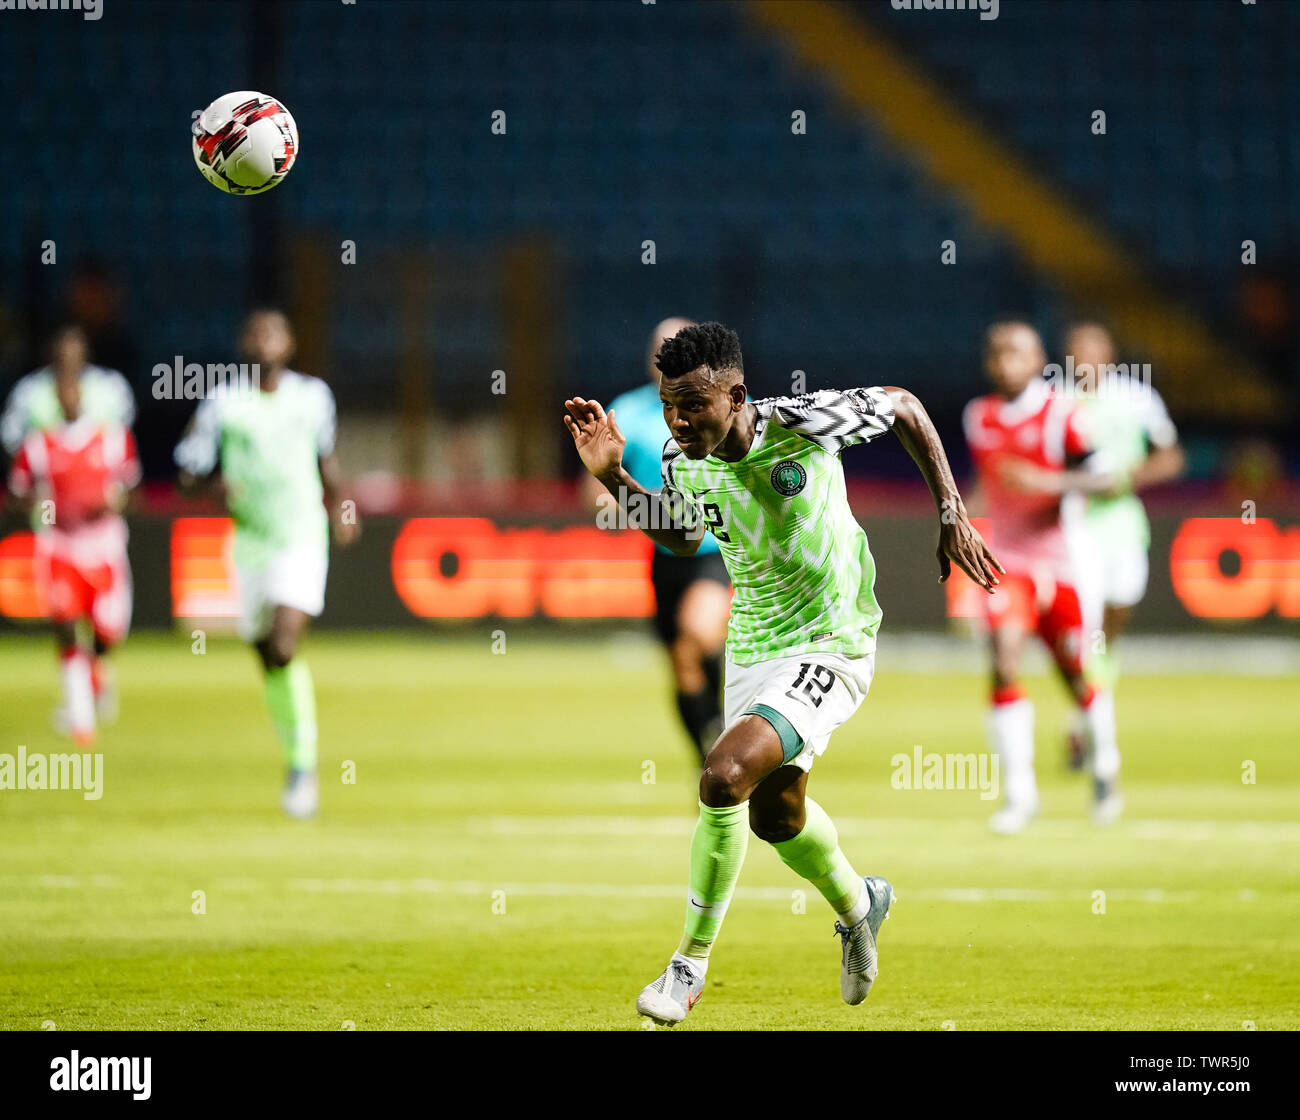 Alexandria, Egypt.   Alexandia, Egypt. 22nd June, 2019. Abdullahi Shehu of Nigeria during the African Cup of Nations match between Nigeria and Burundi at the Alexandria Stadium in Alexandia, Egypt. Ulrik Pedersen/CSM/Alamy Live News Stock Photo